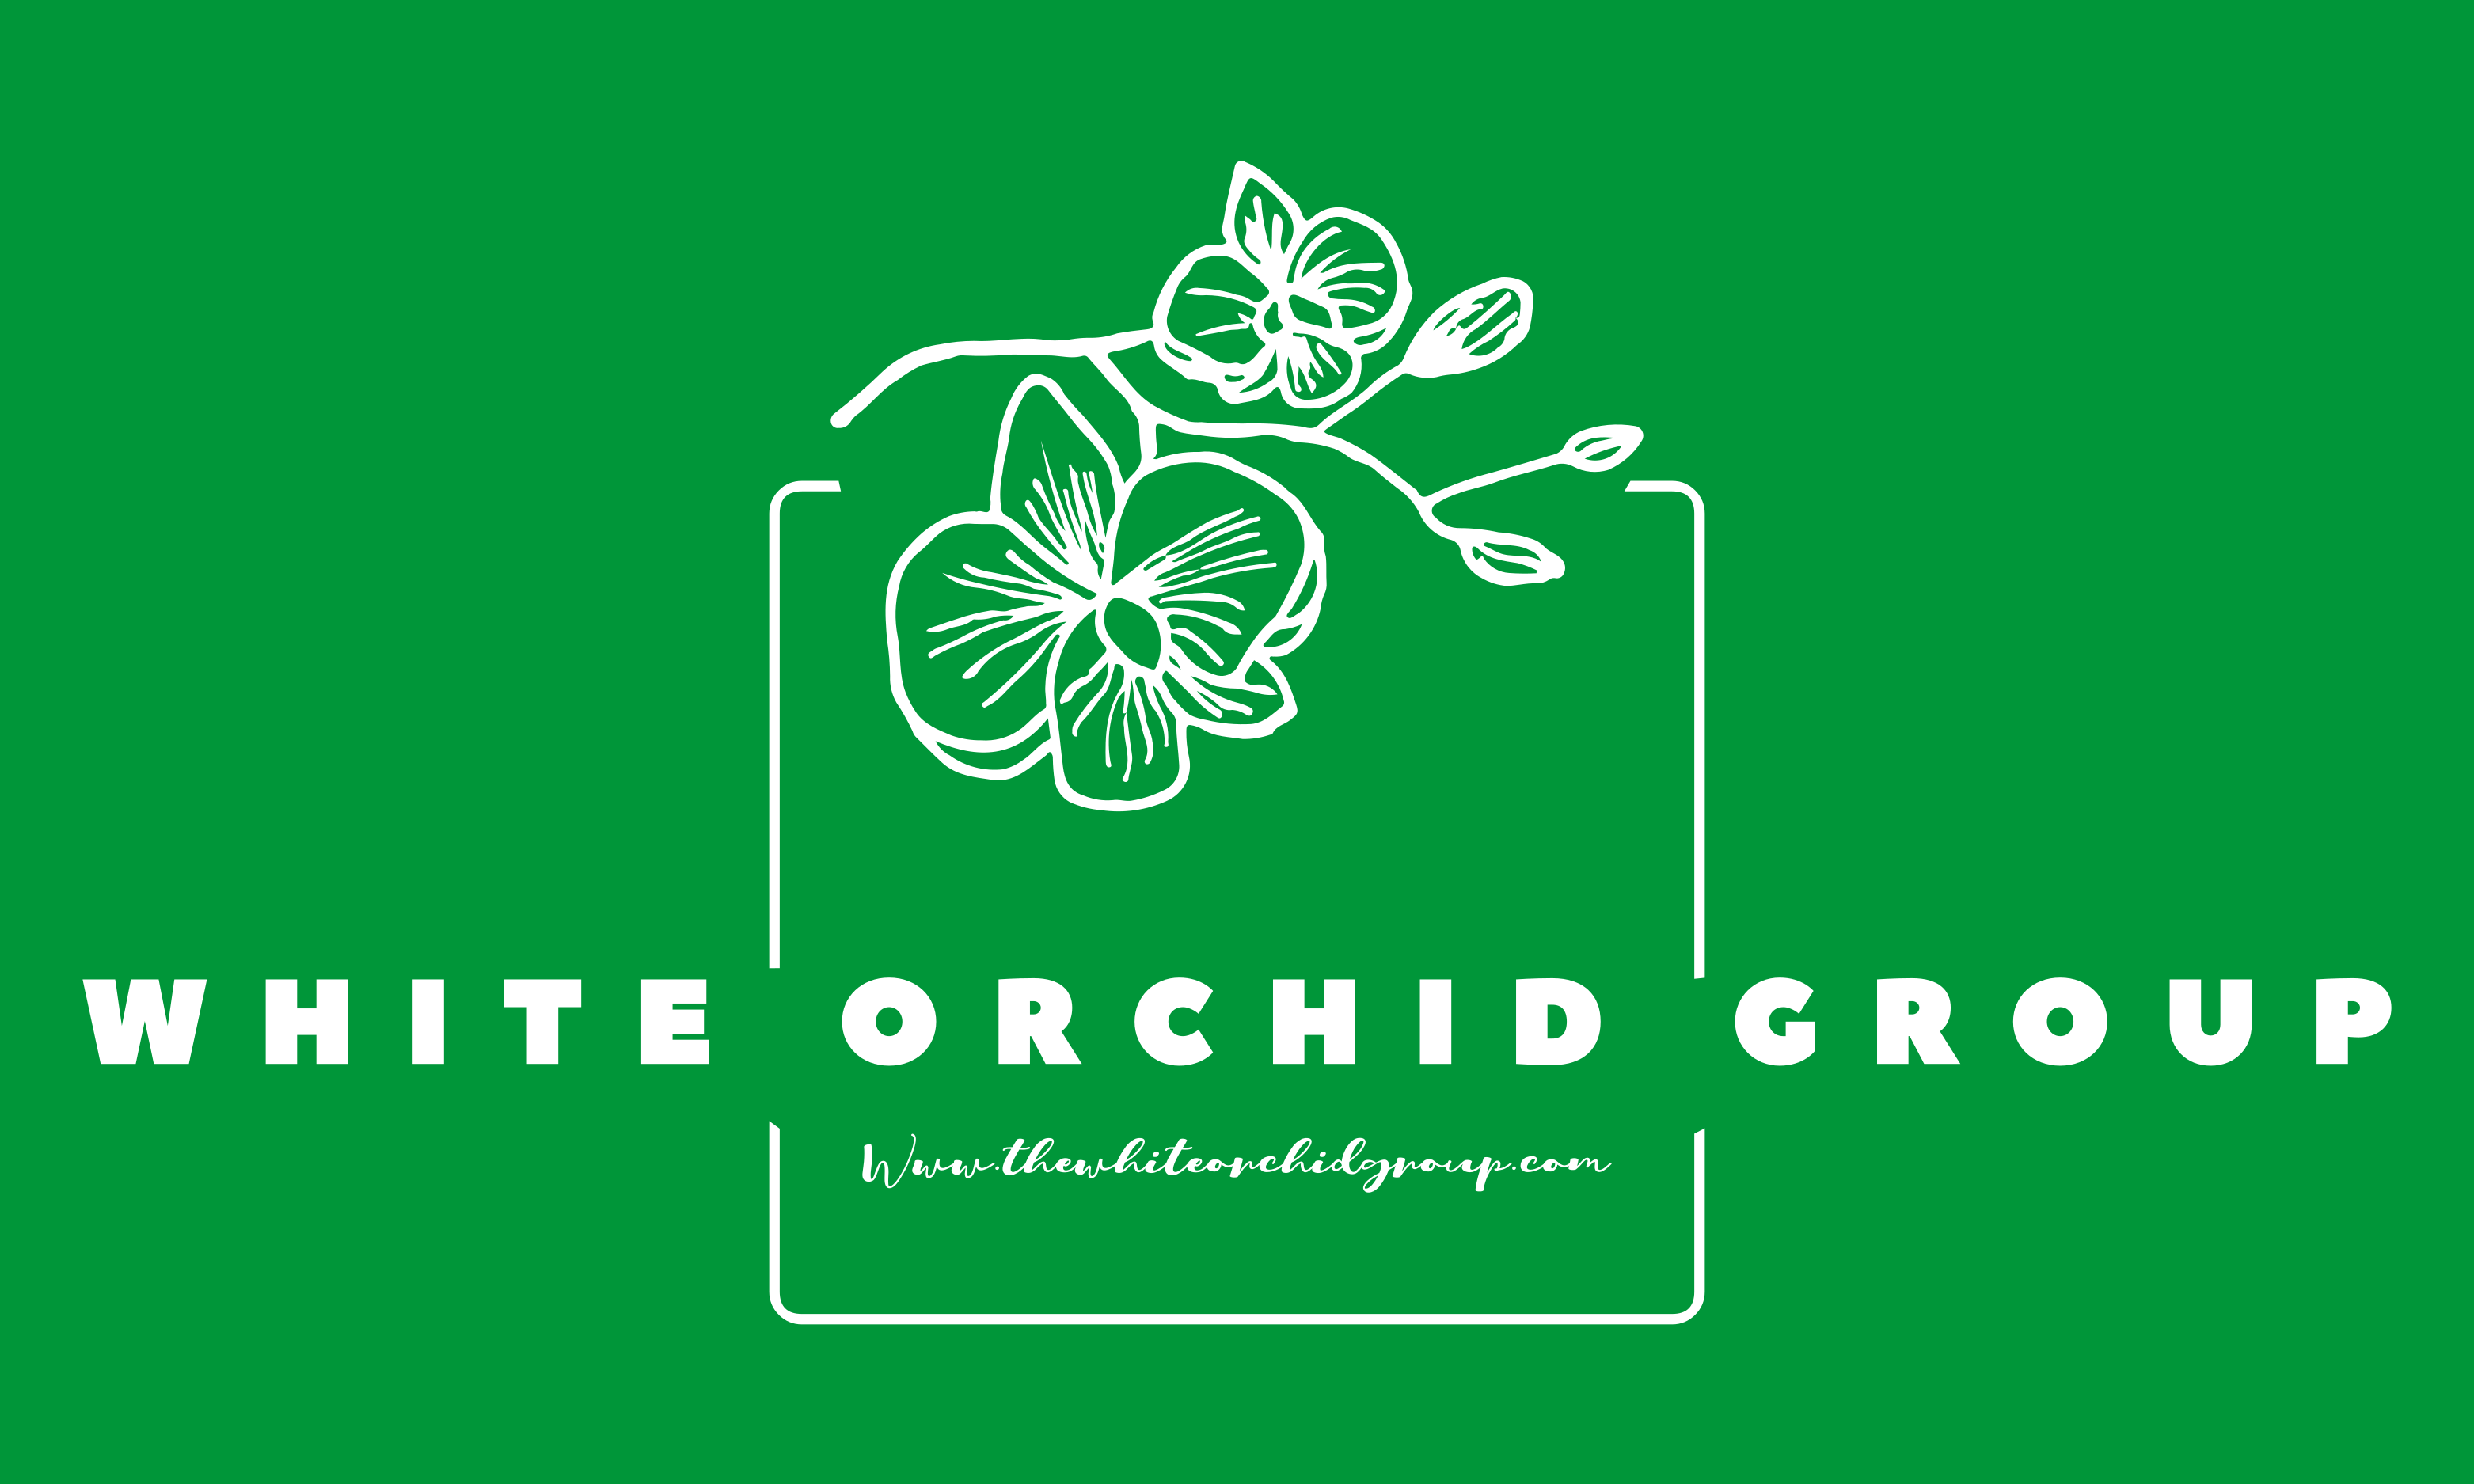 The White Orchid Group